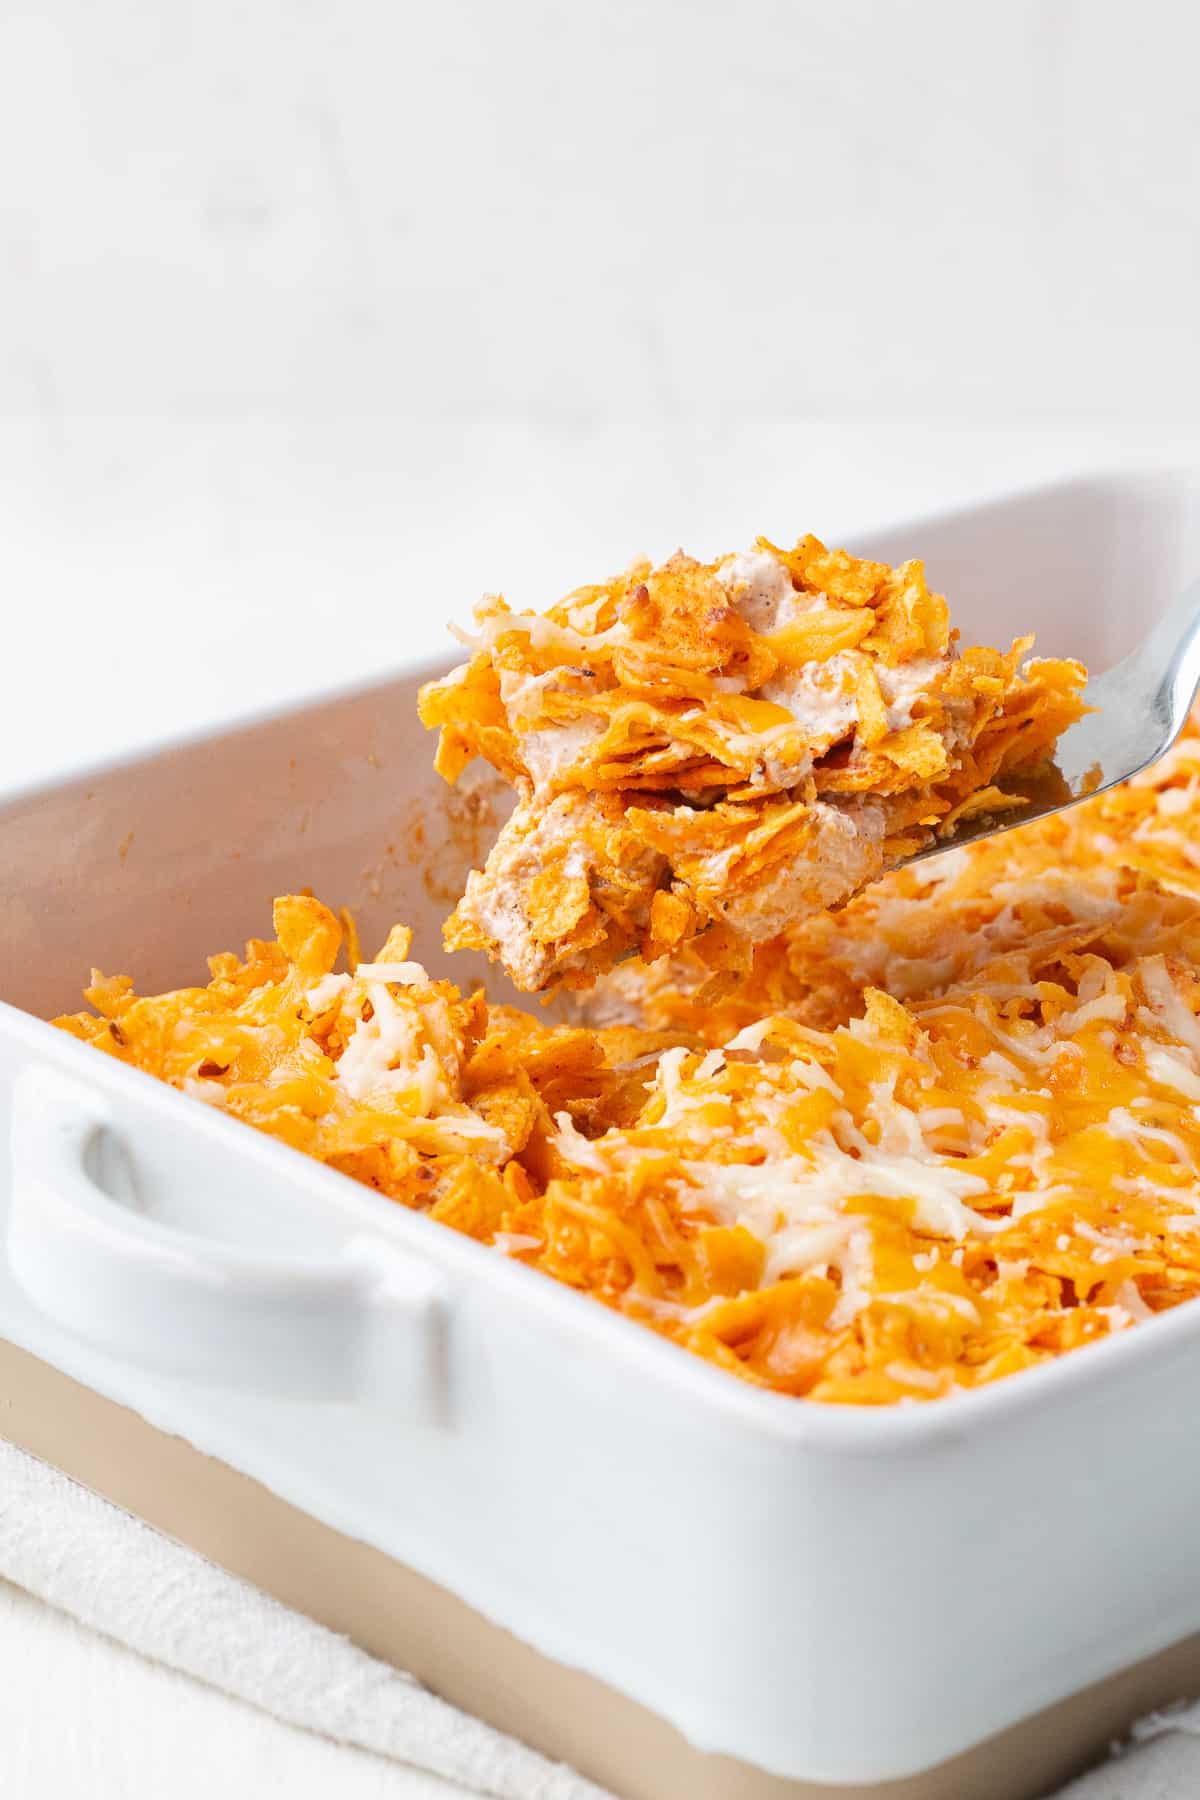 metal spatula lifting up a serving of dorito chicken casserole from a white casserole dish.